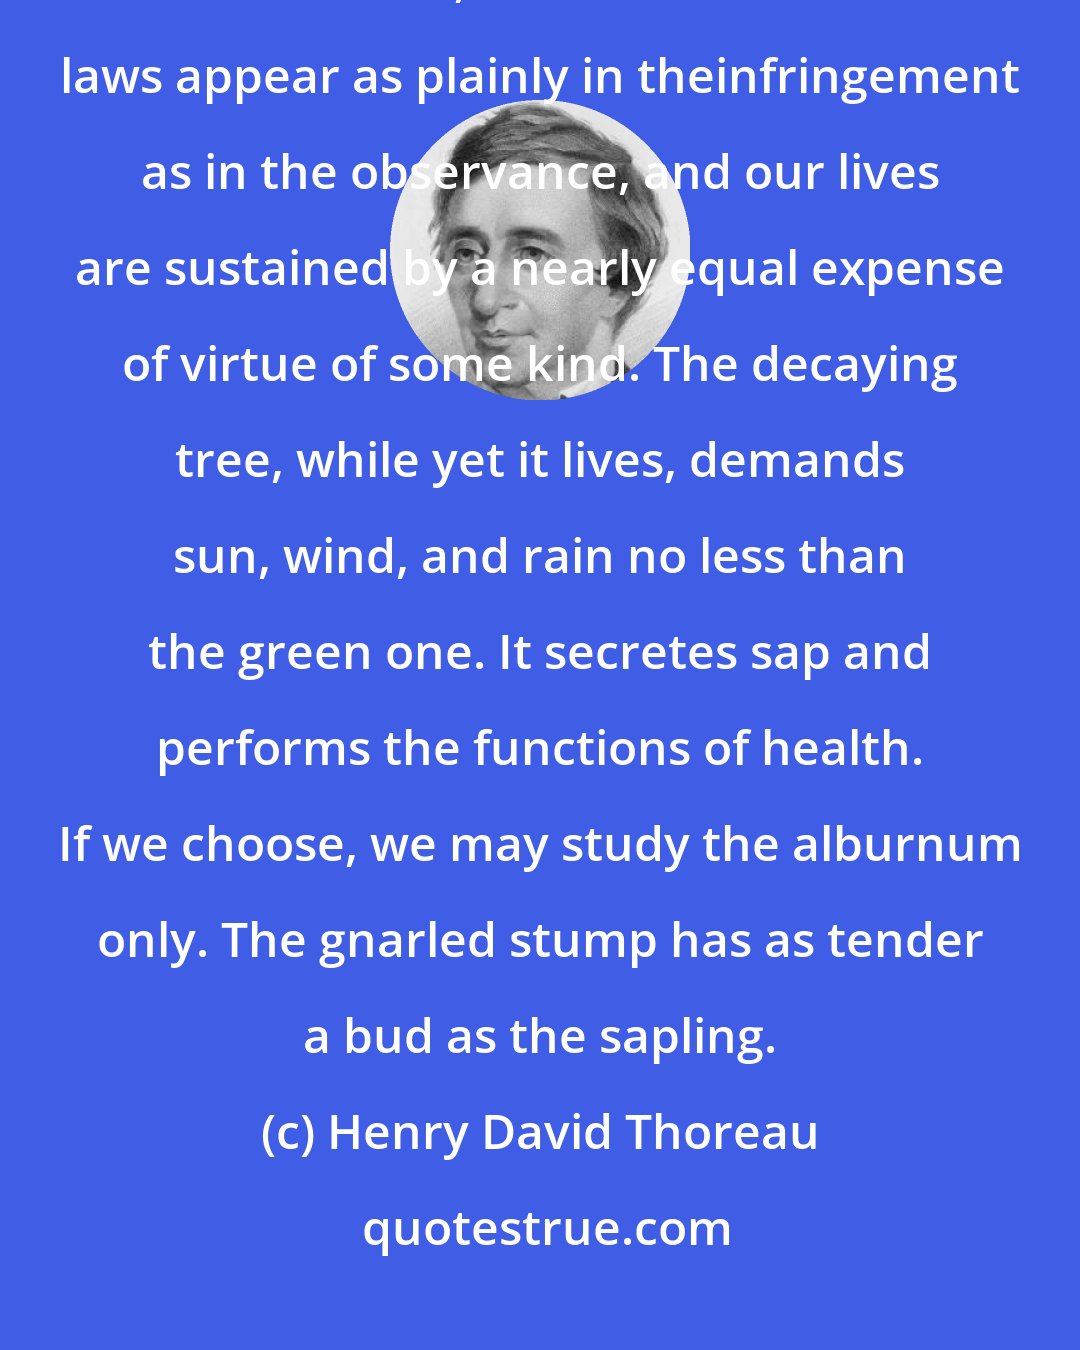 Henry David Thoreau: The life of a good man will hardly improve us more than the life of a freebooter, for the inevitable laws appear as plainly in theinfringement as in the observance, and our lives are sustained by a nearly equal expense of virtue of some kind. The decaying tree, while yet it lives, demands sun, wind, and rain no less than the green one. It secretes sap and performs the functions of health. If we choose, we may study the alburnum only. The gnarled stump has as tender a bud as the sapling.